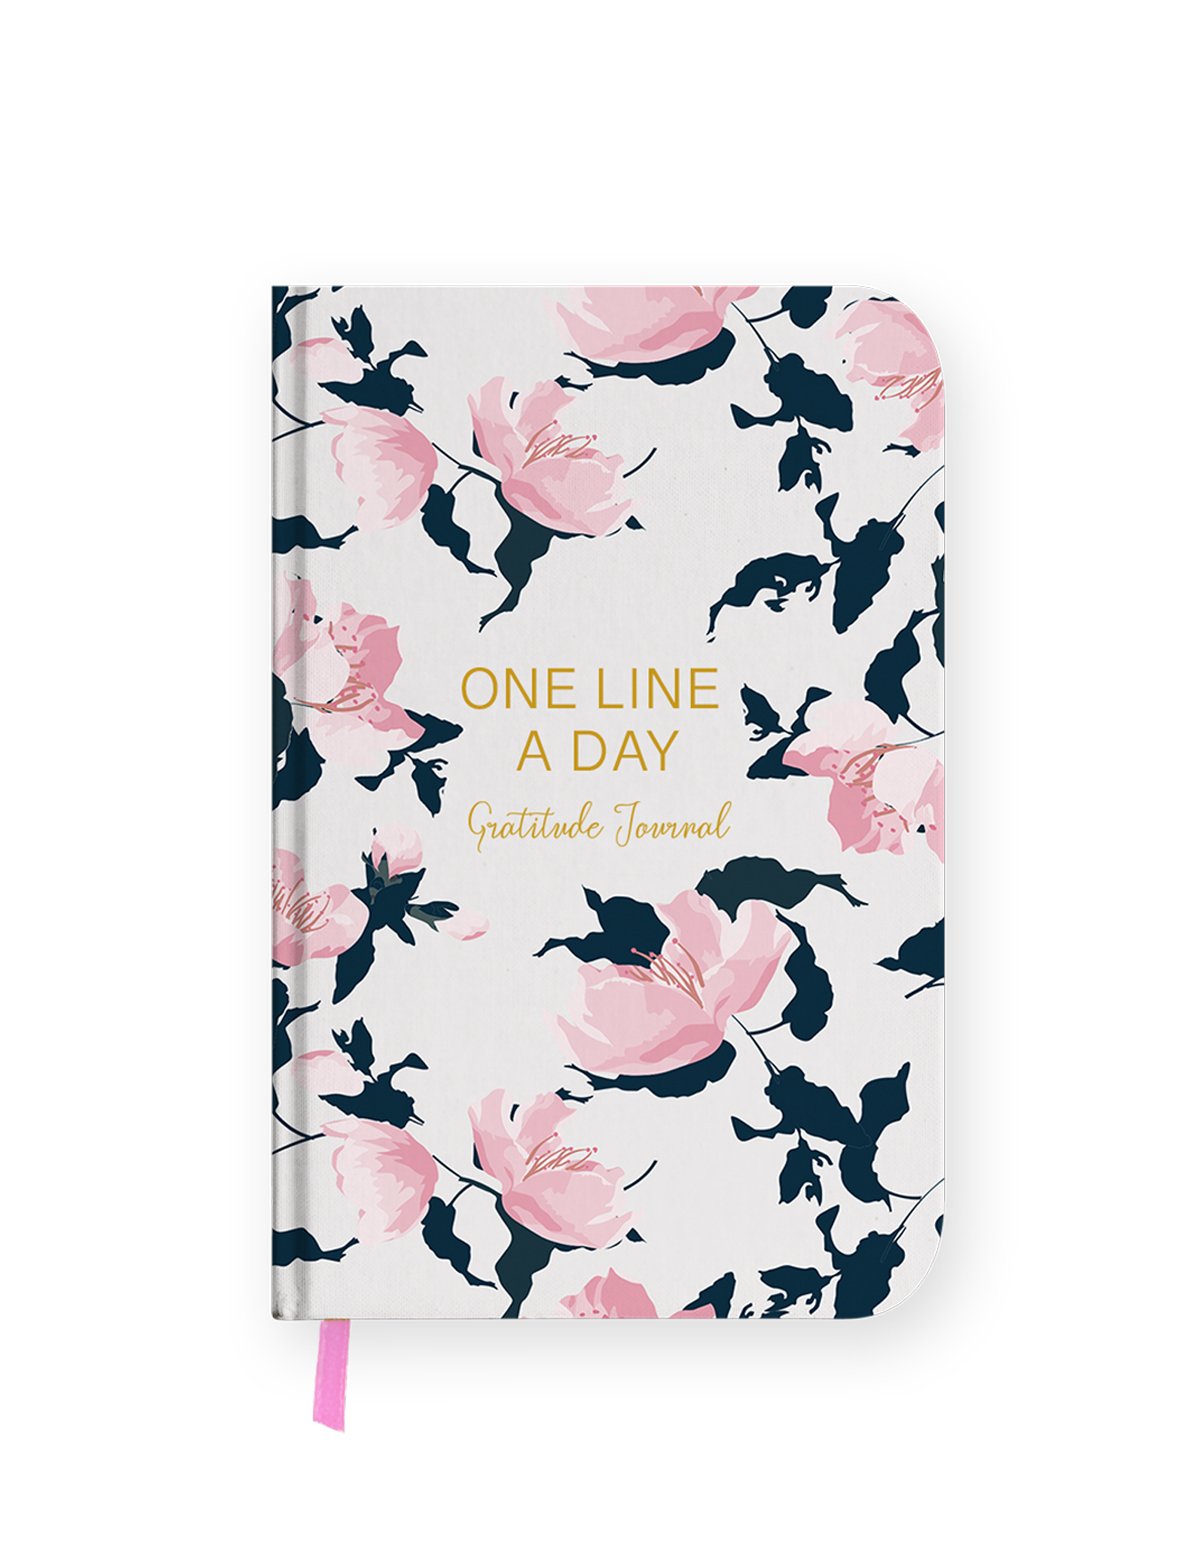 One Line A Day Gratitude Journal 5 Year Journal